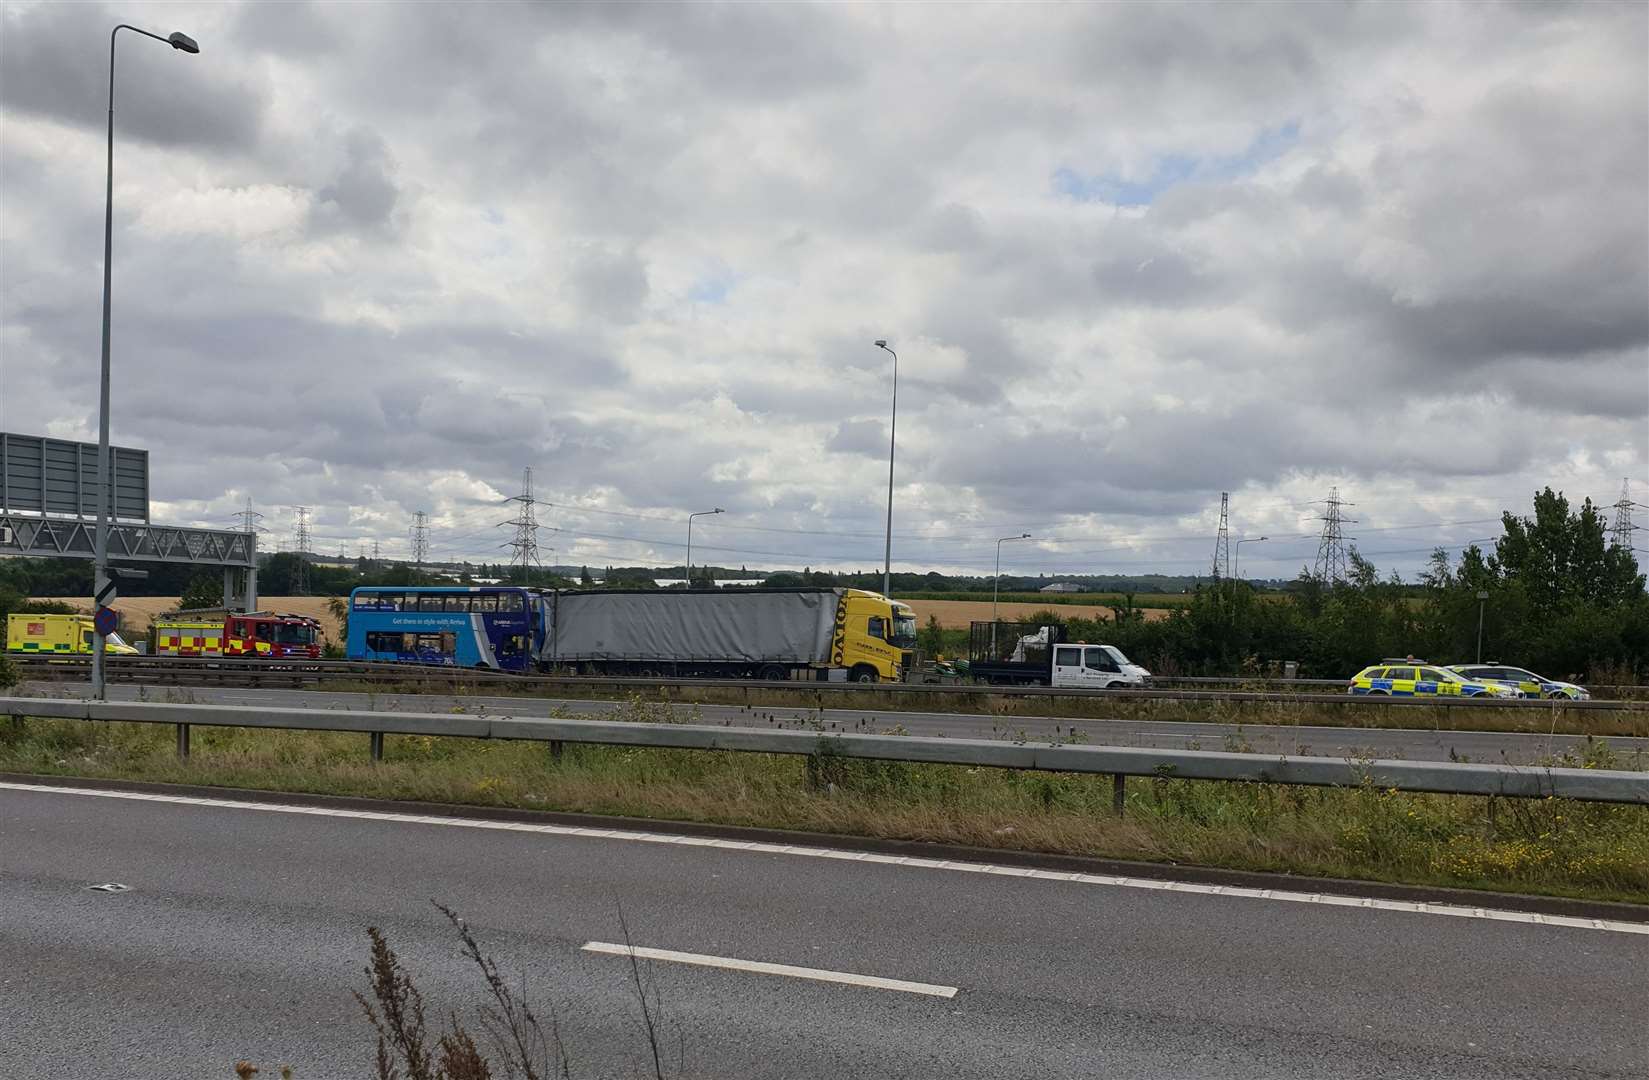 Traffic is gridlocked on the A2 after a crash. Pic: Matt Bray